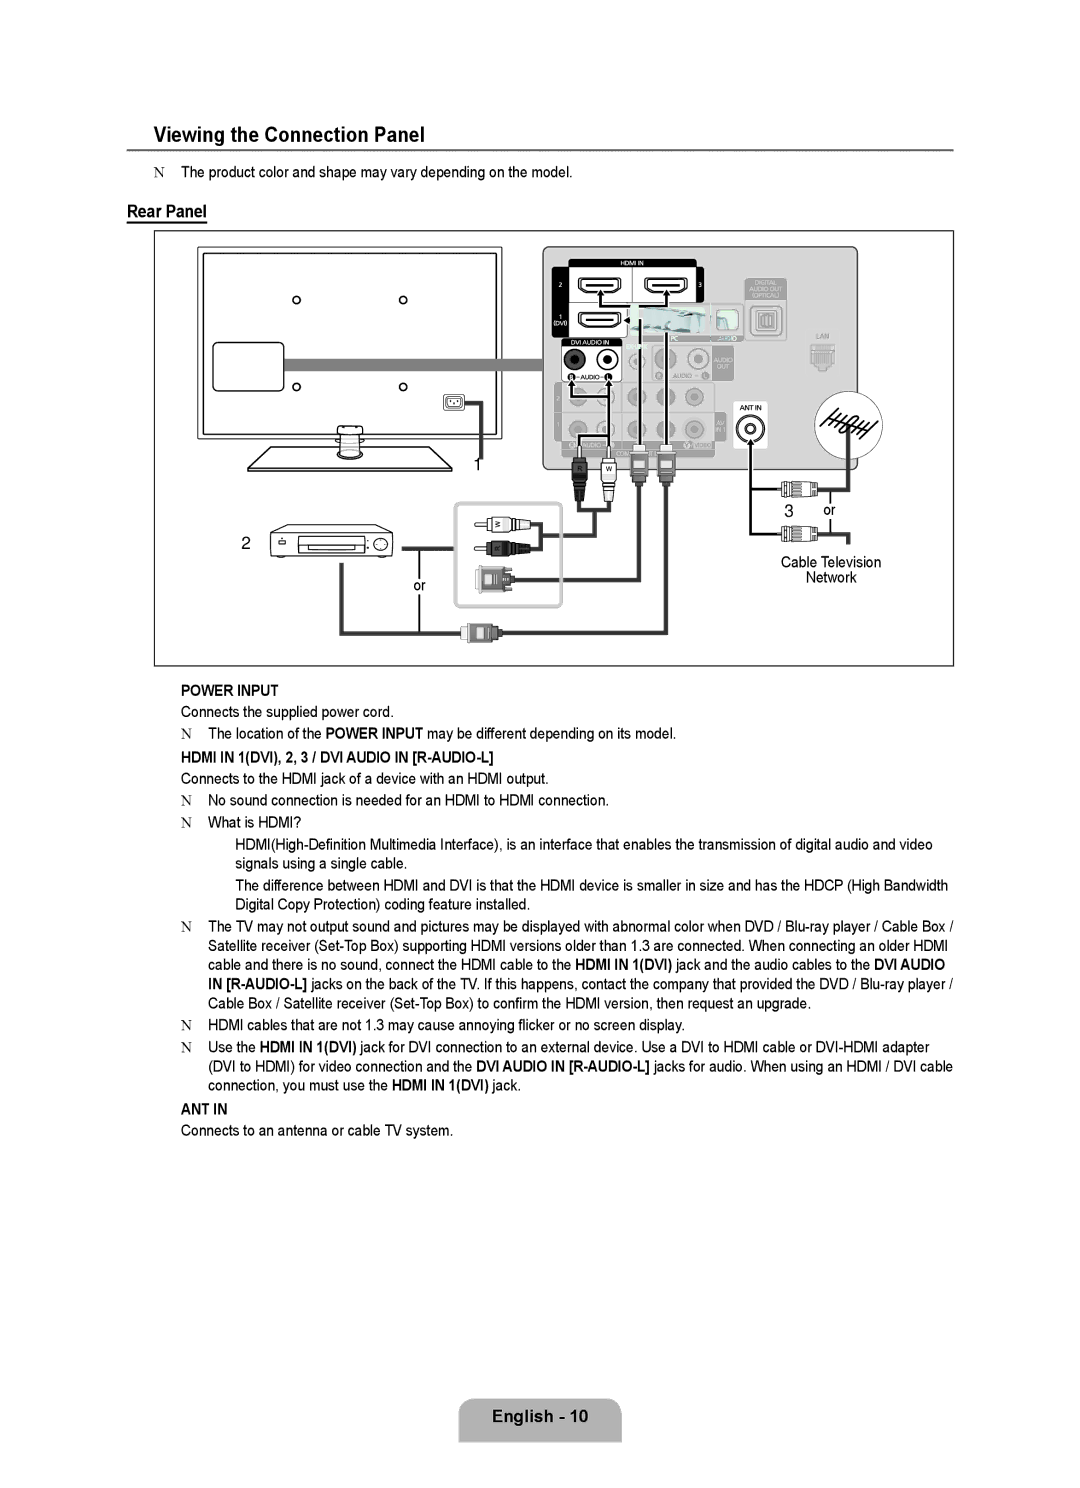 Samsung LN6B60 user manual Viewing the Connection Panel, Rear Panel, Power Input, Ant 